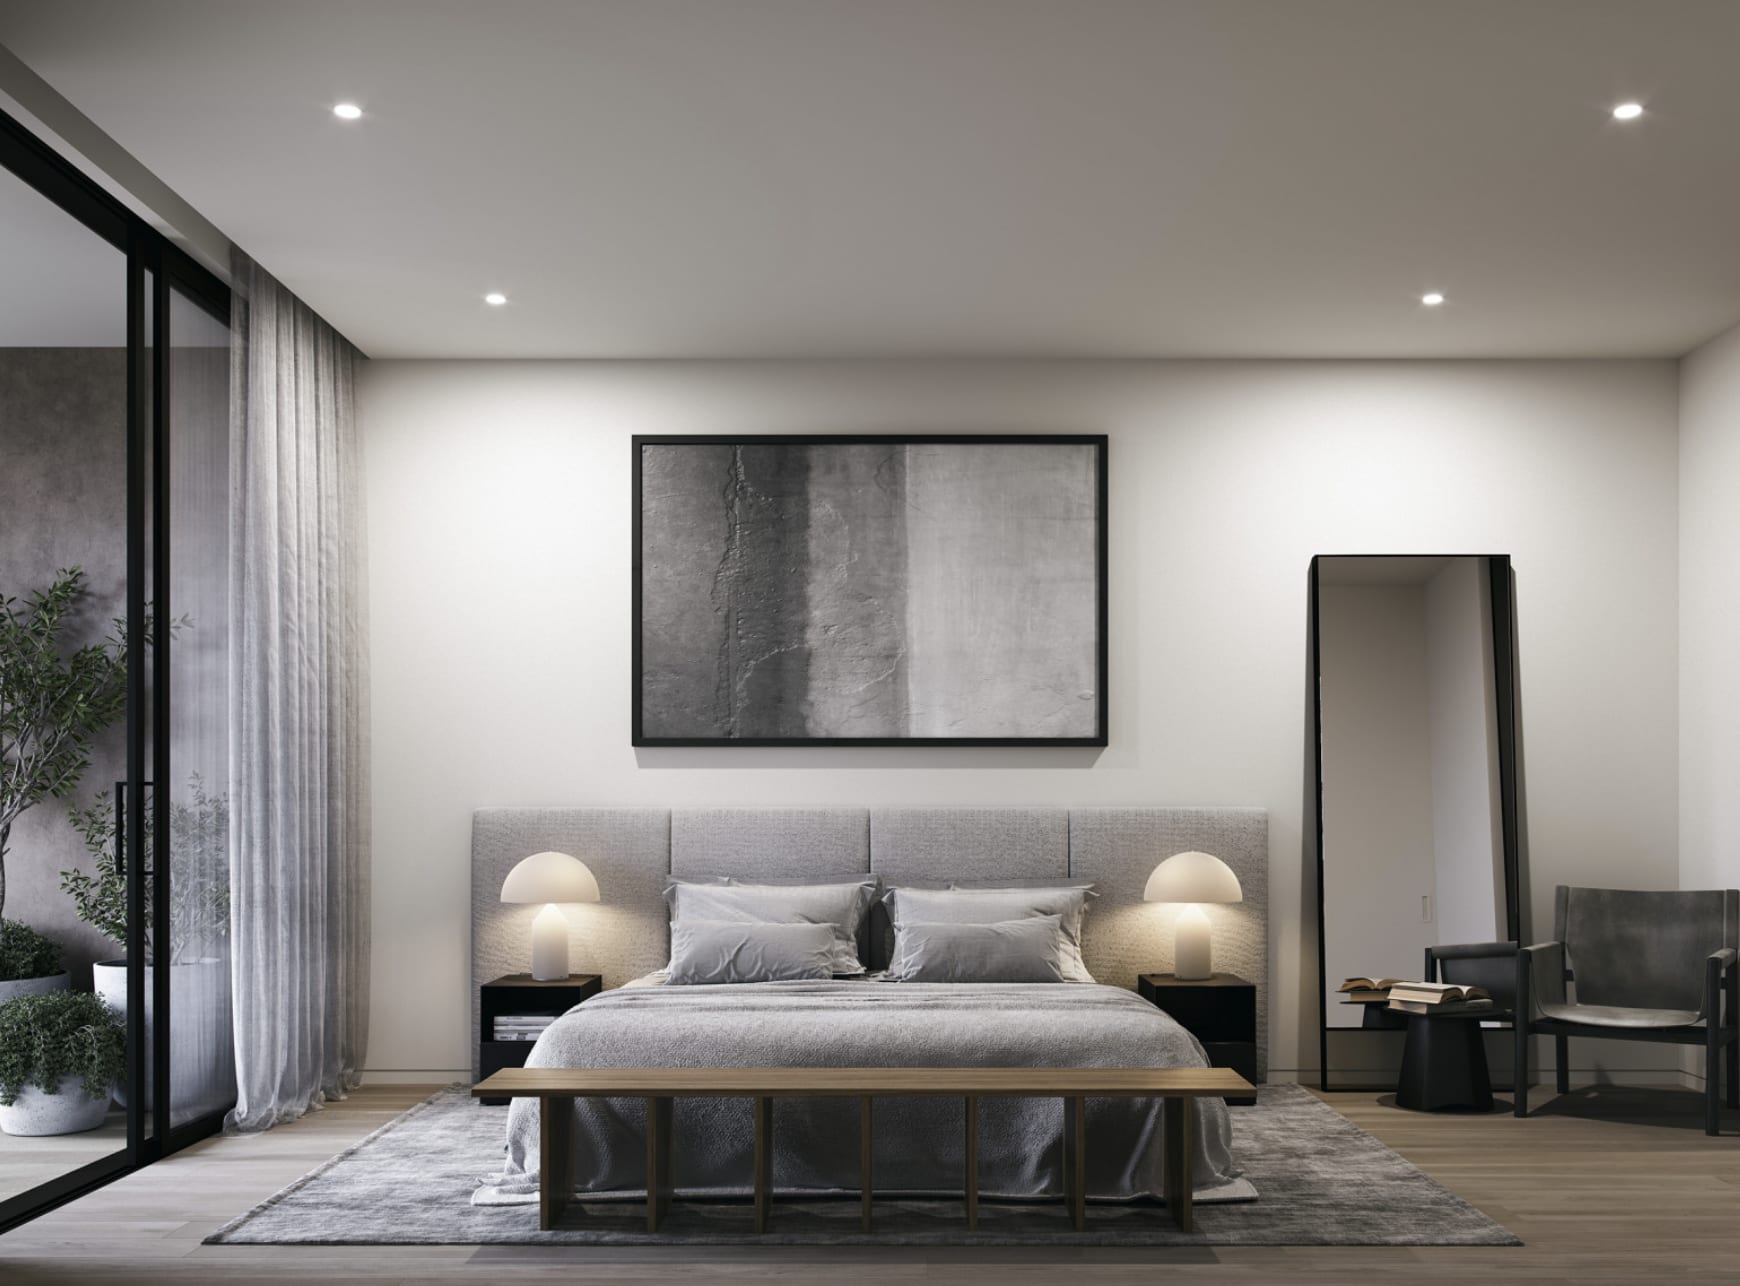 Fortis’ top 5 apartment developments across Sydney and Melbourne in 2022